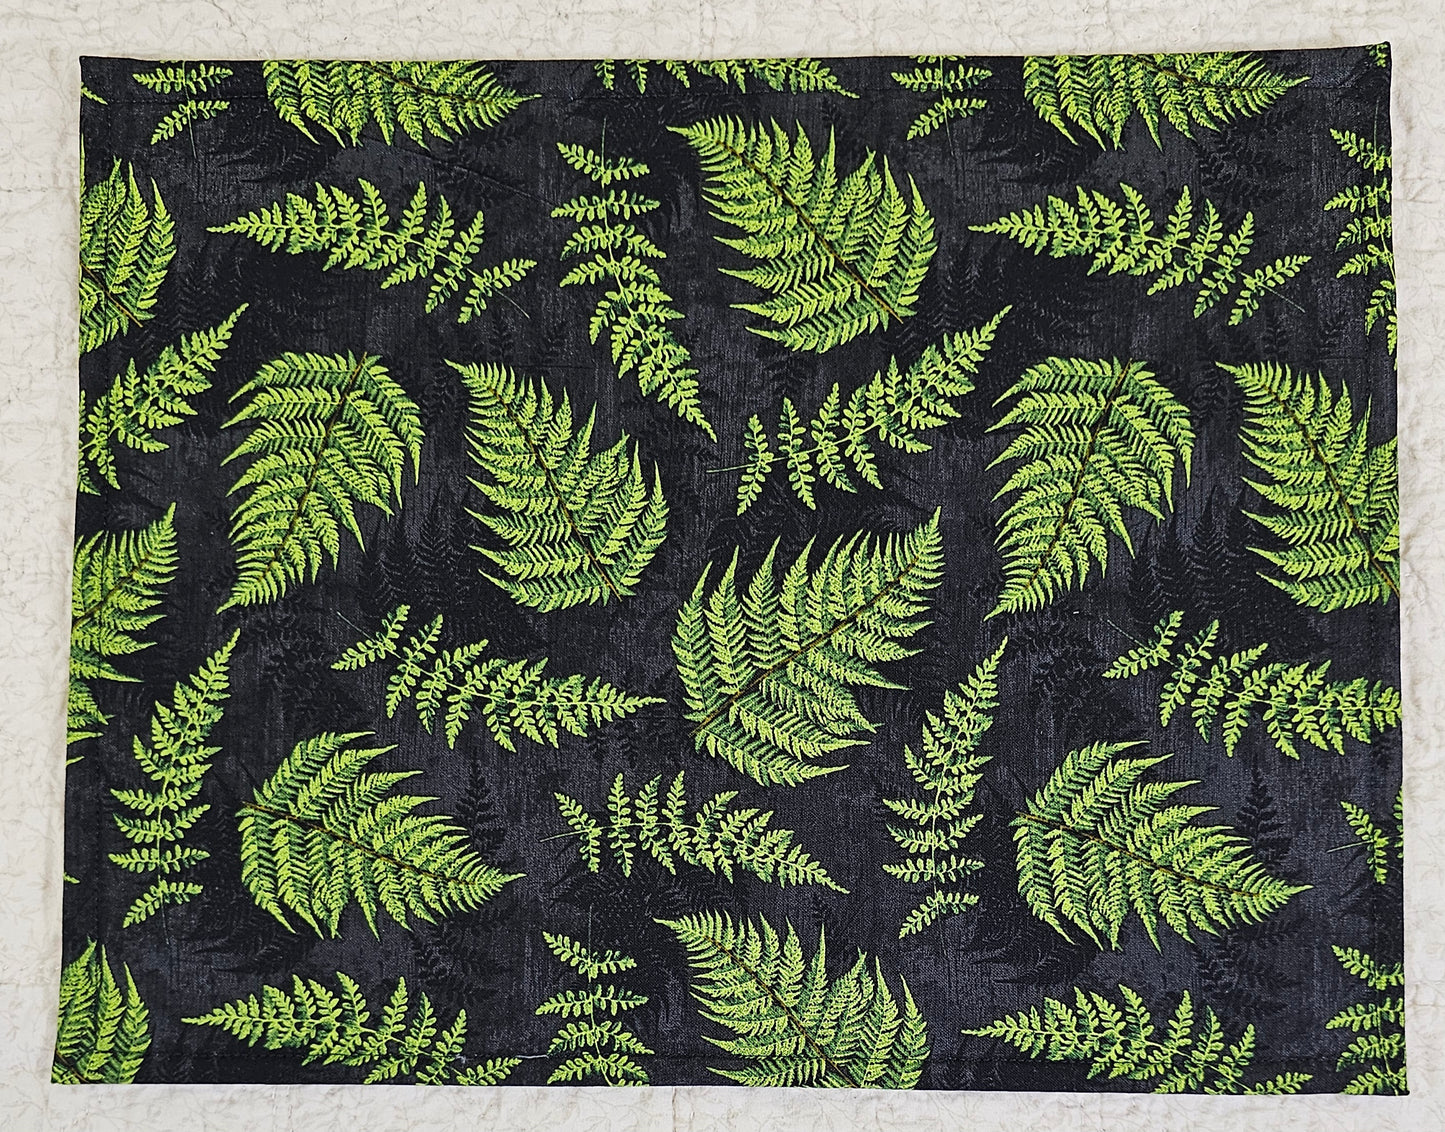 Flowers and Butterflies - with ferns on black back -  11" x 14" Project Bag